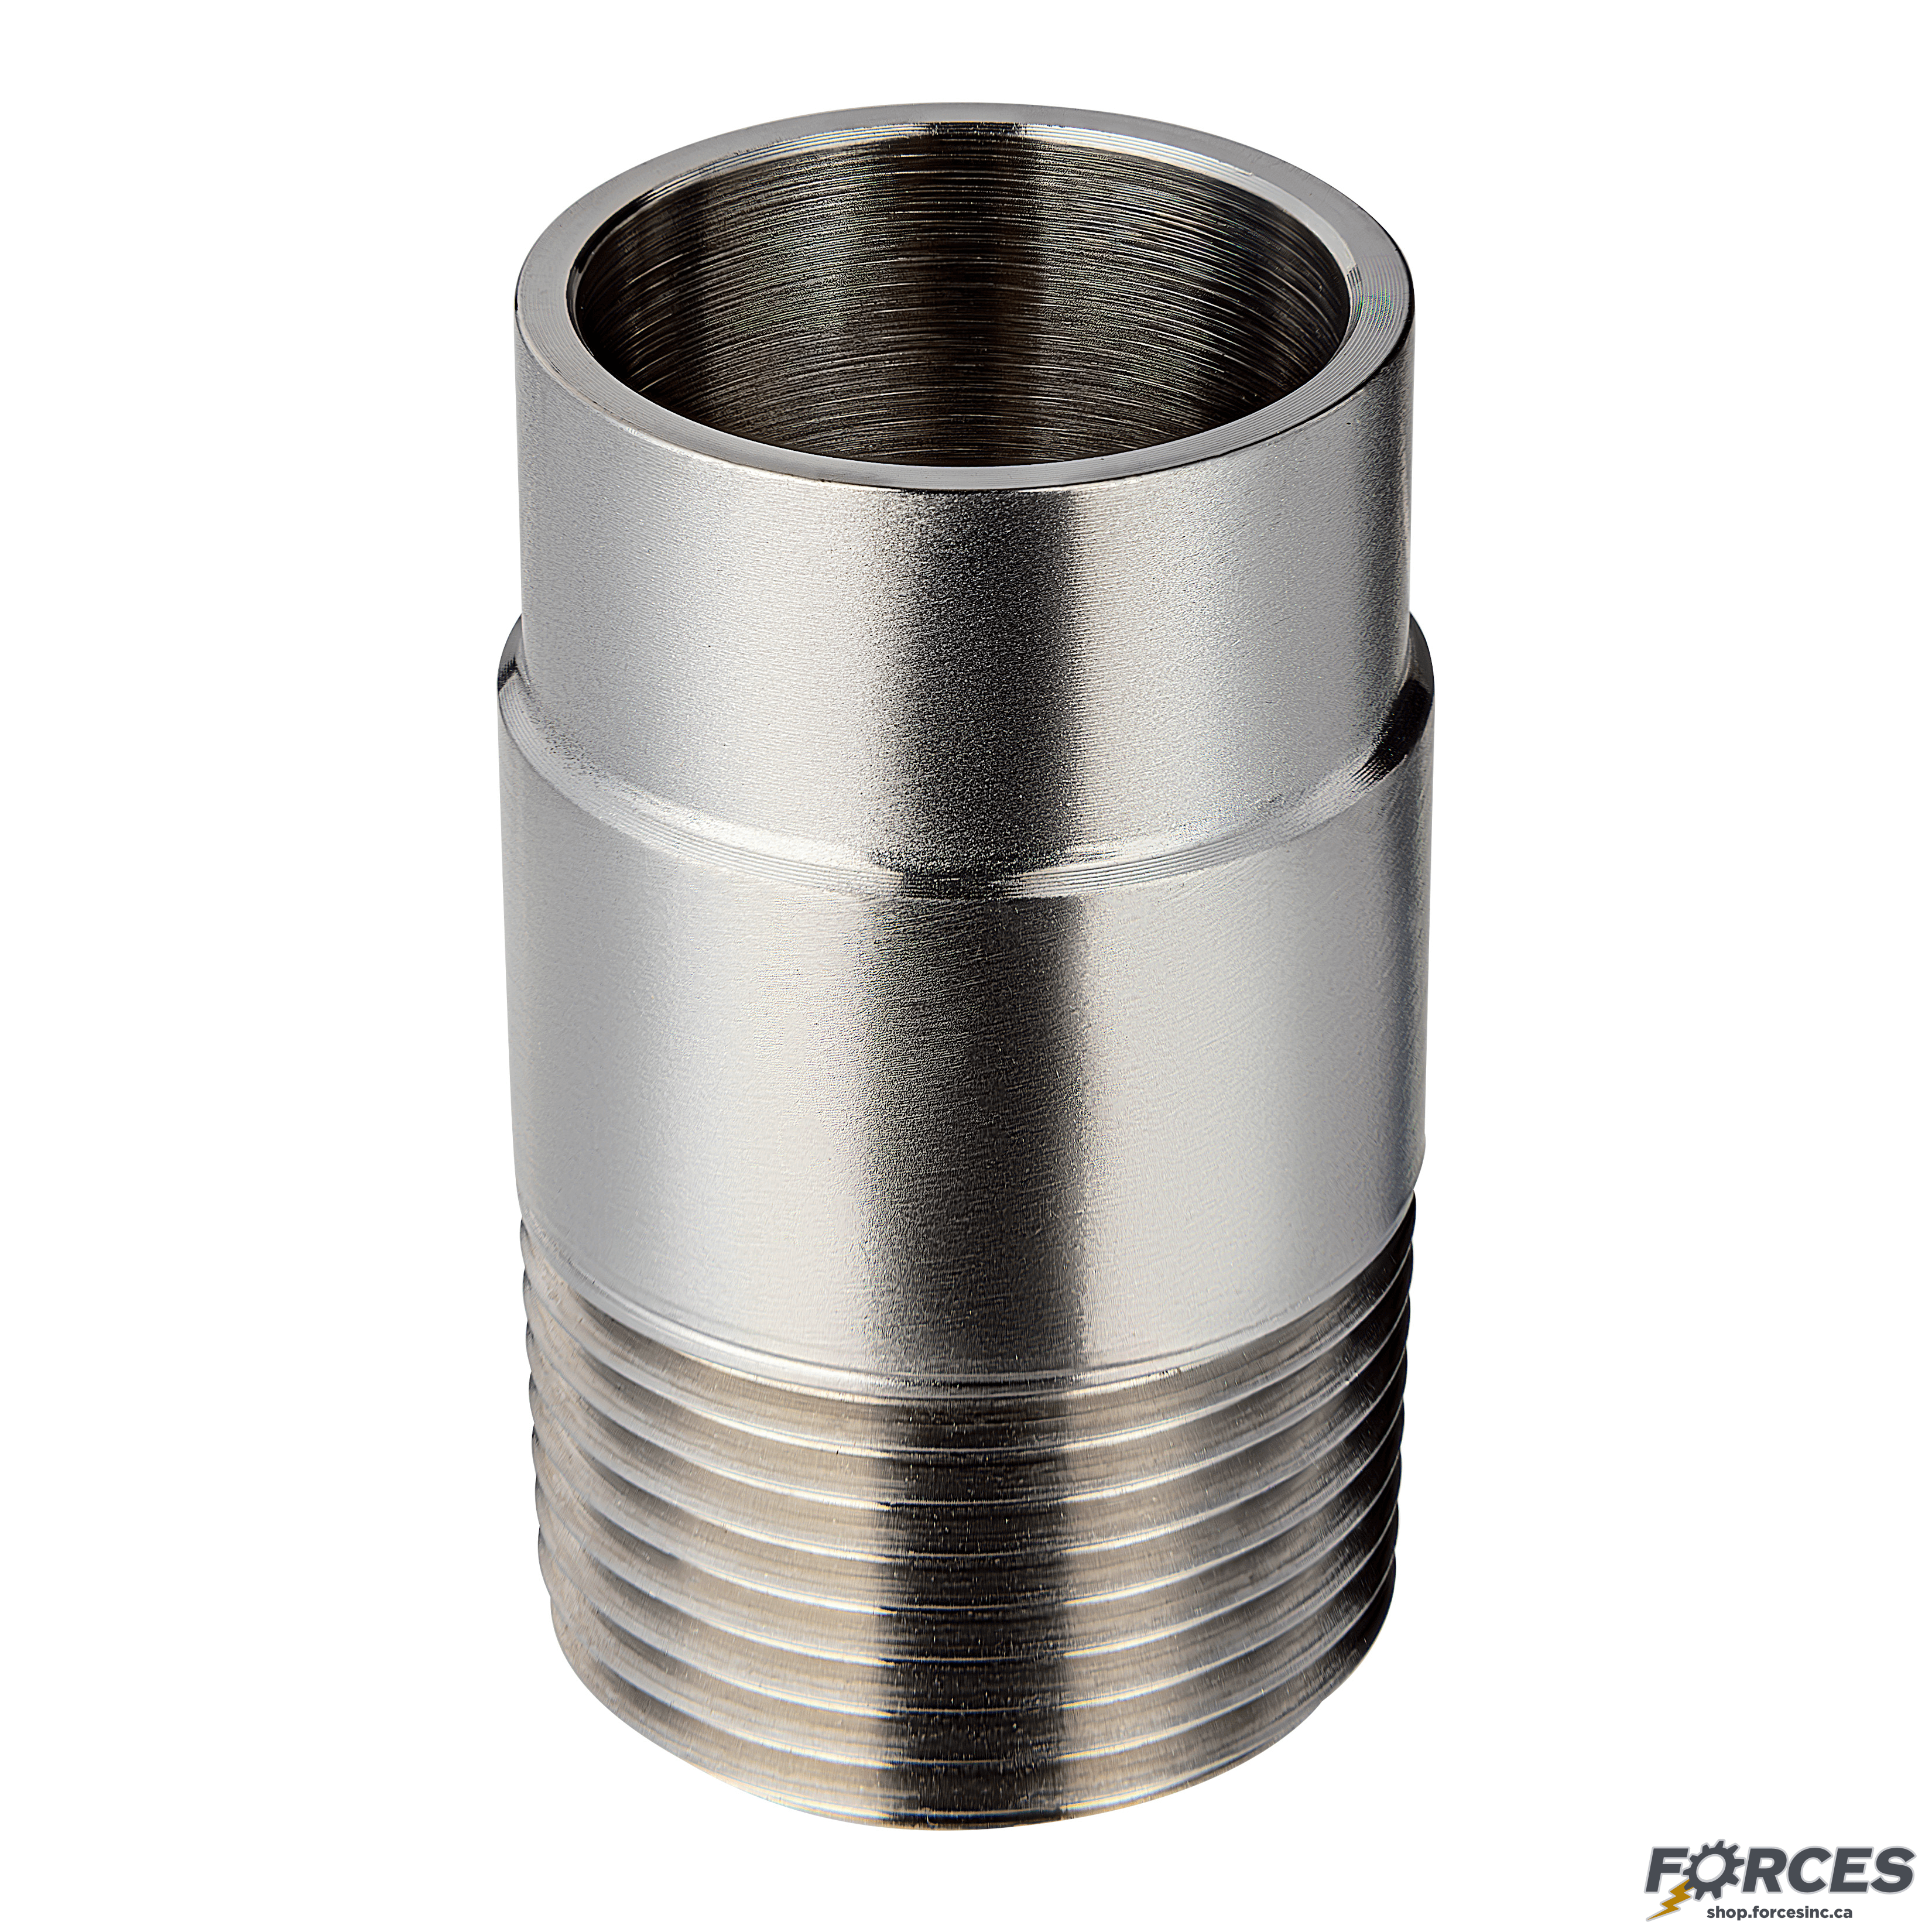 2" x 1-1/2" Butt Weld x Male NPT Adapter - Stainless Steel 316 - Forces Inc